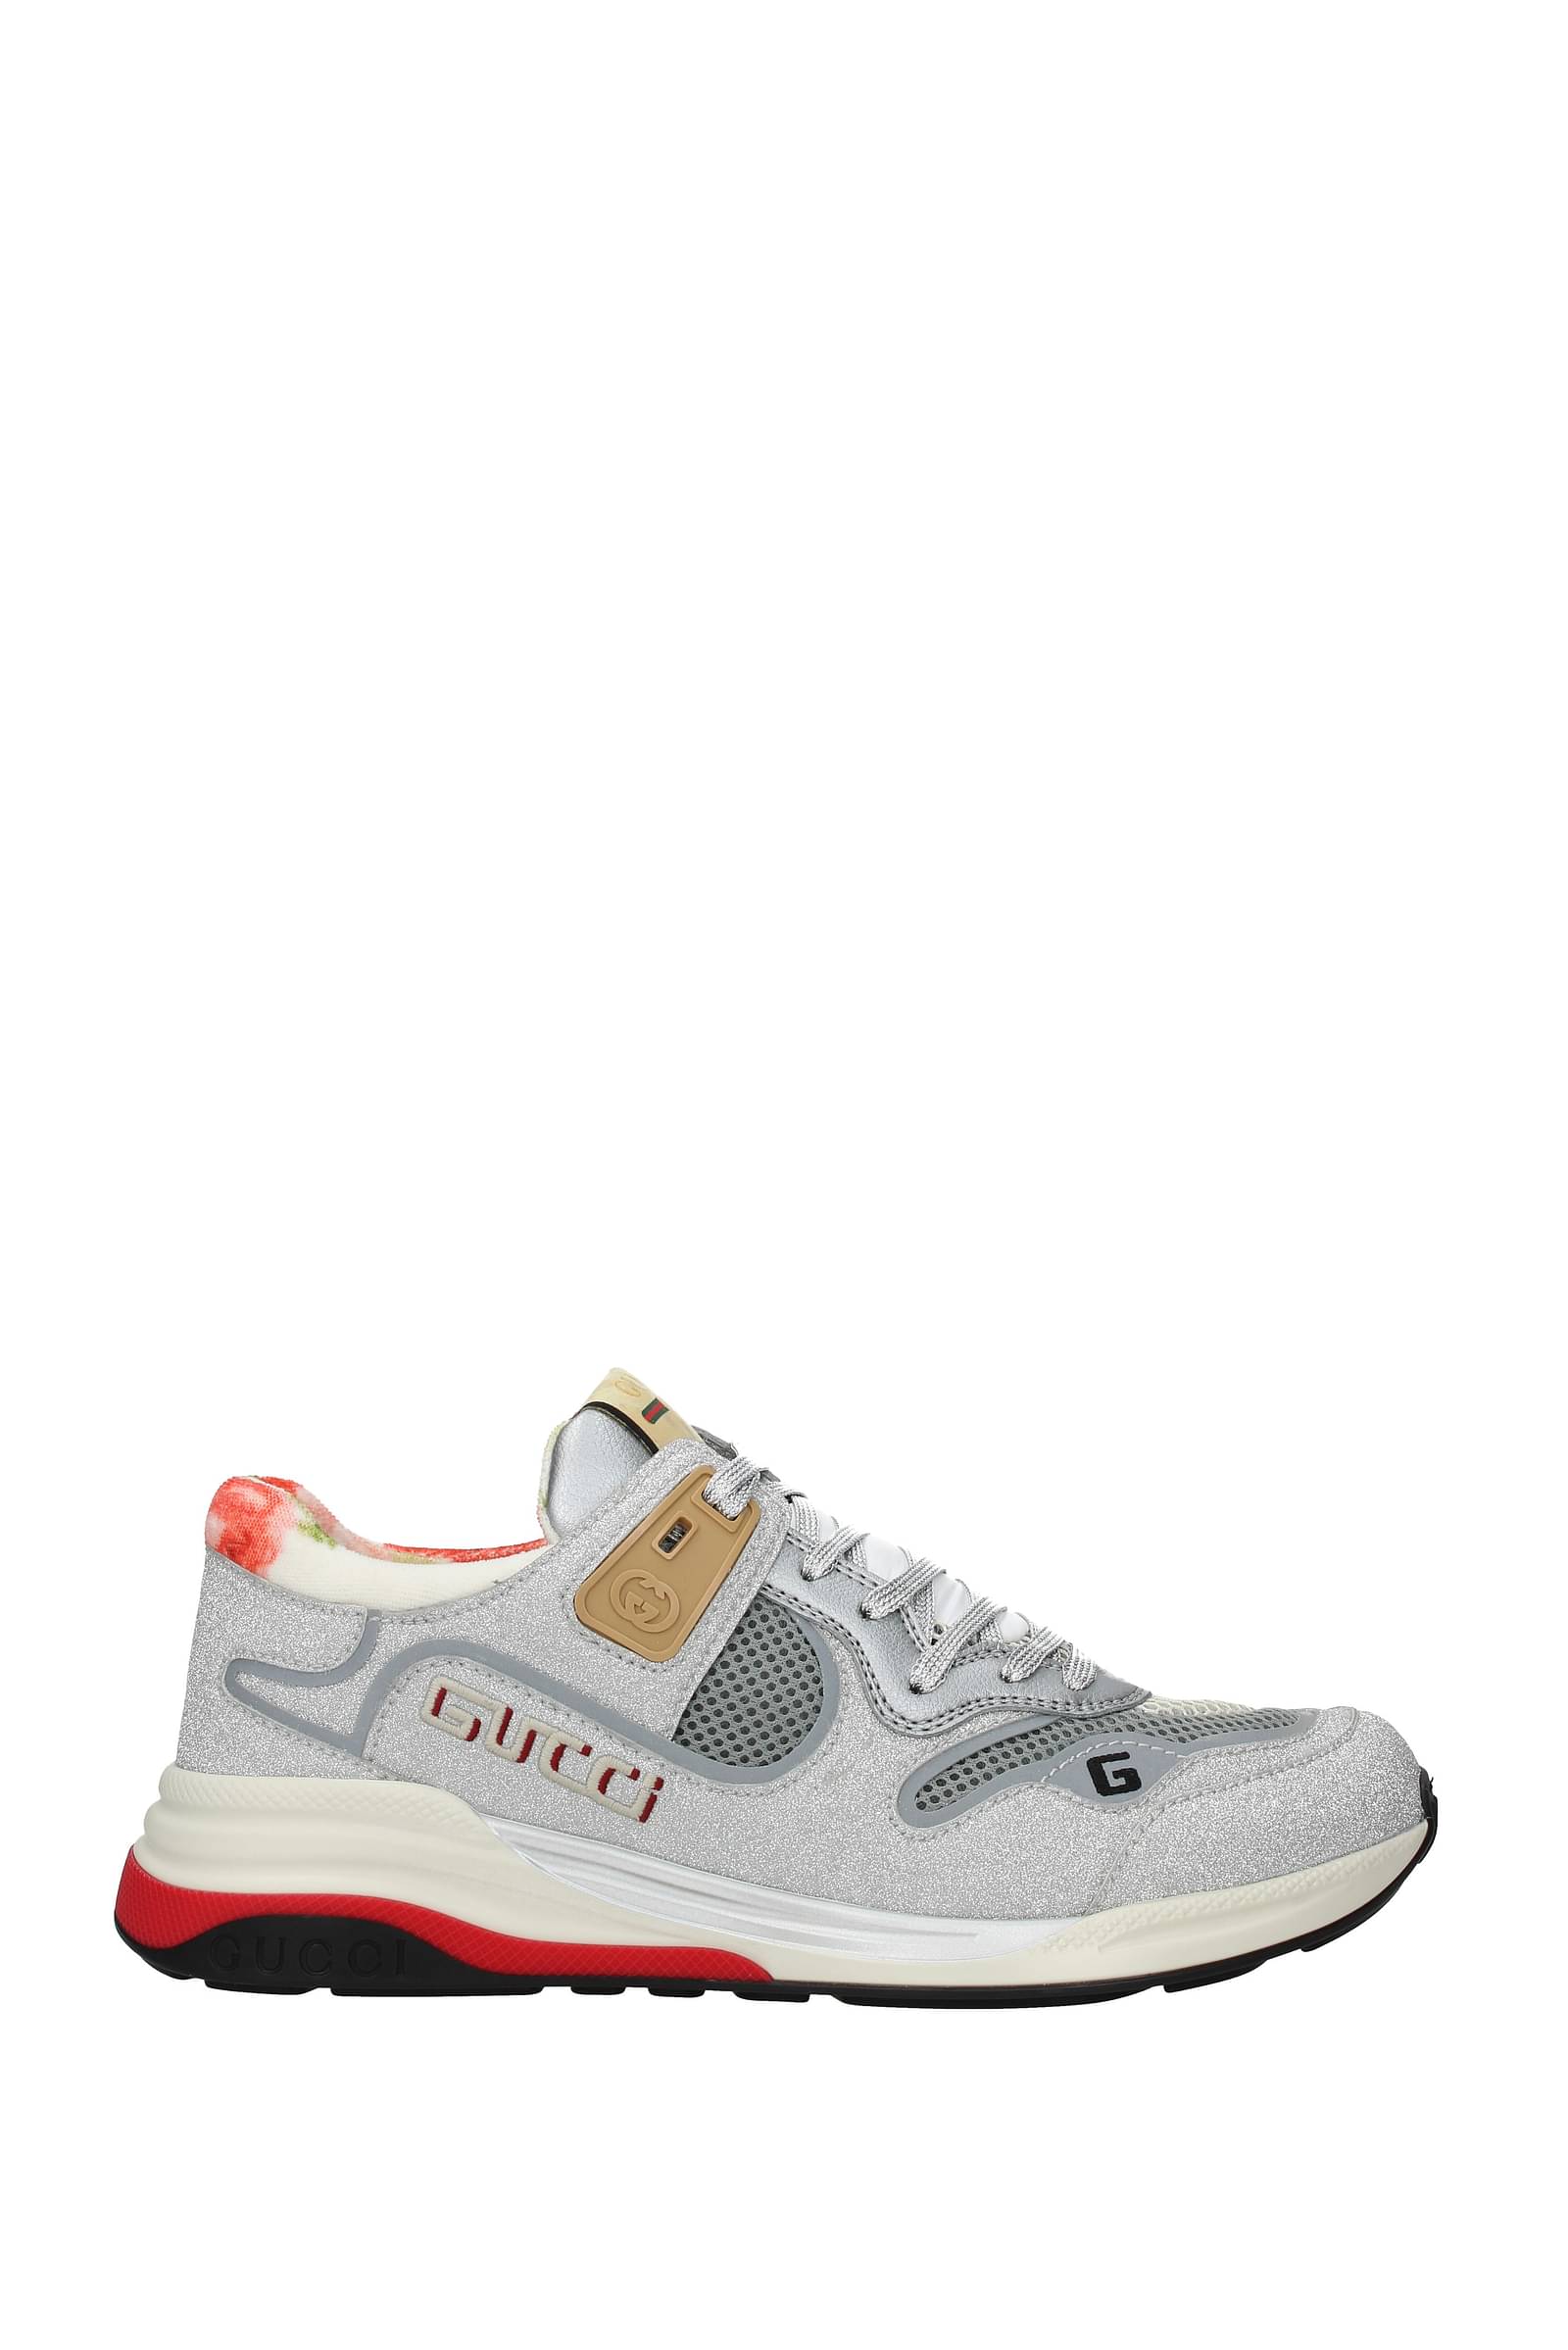 gucci sneakers outlet online